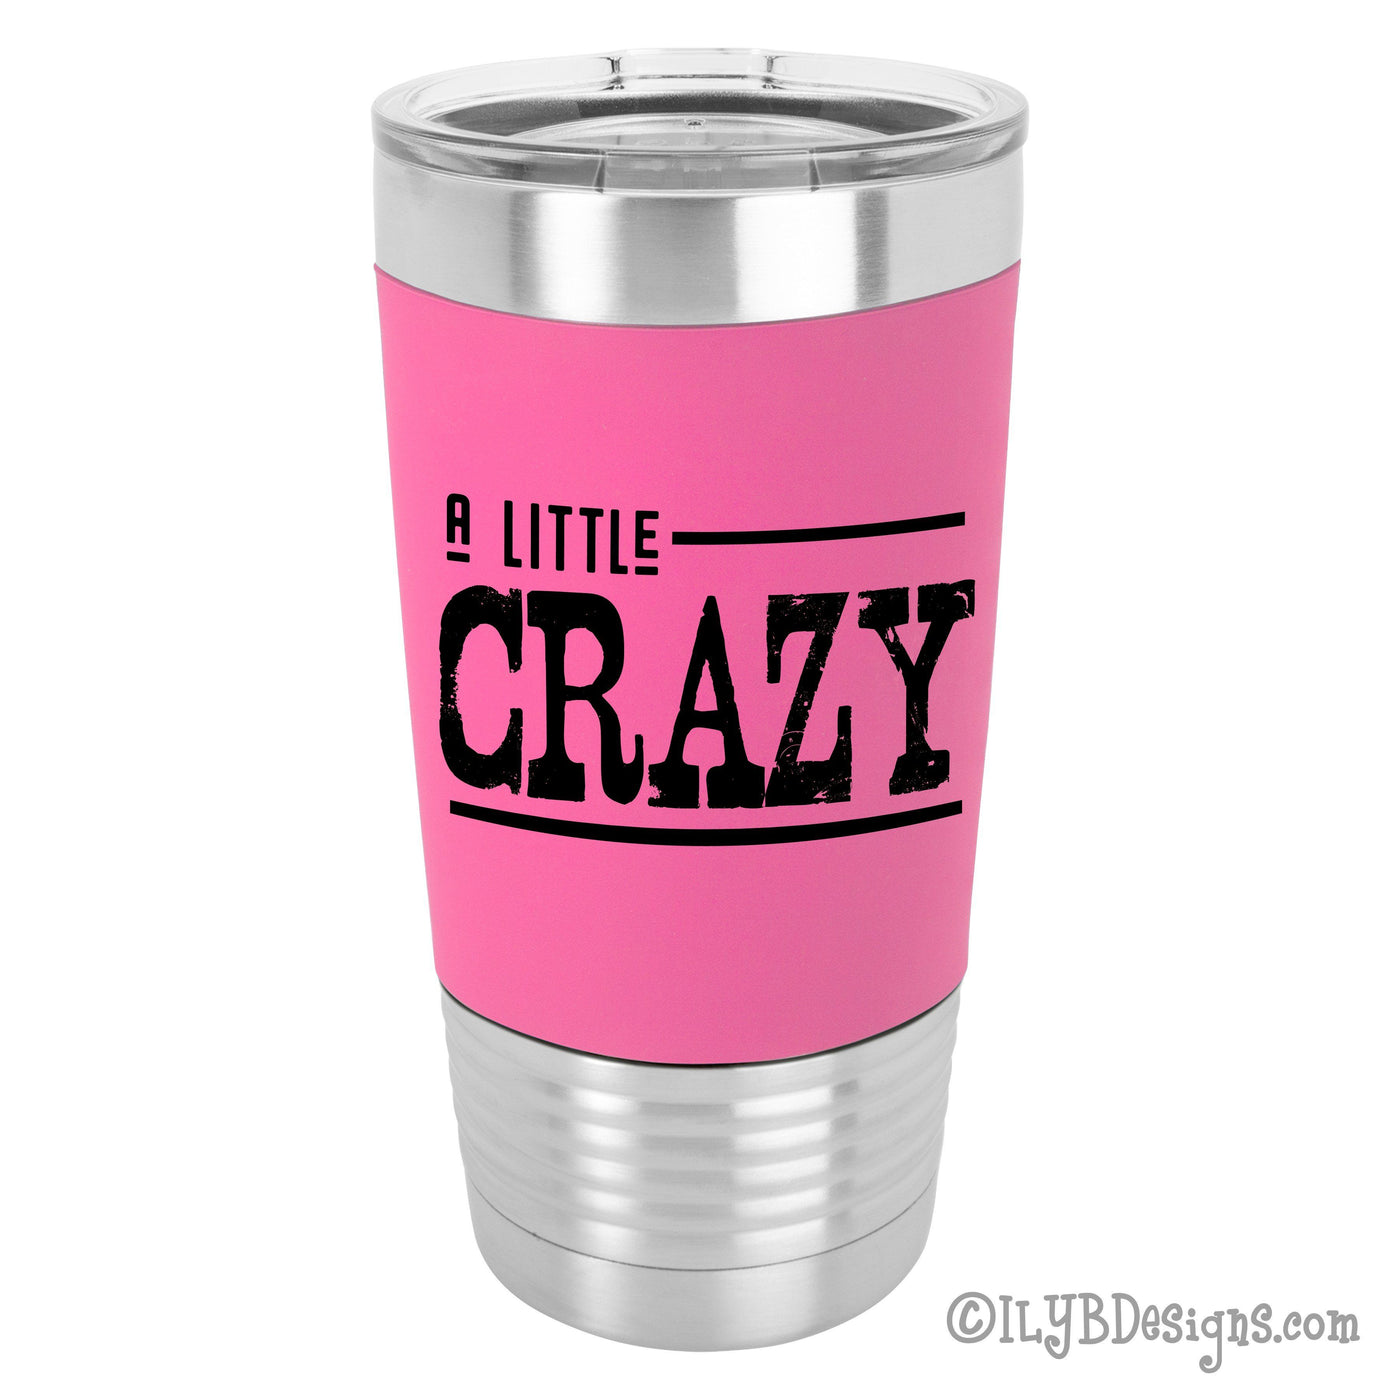 A Little Crazy 20oz Polar Camel Stainless Steel Tumbler with pink silicone sleeve. The words "A little crazy" are laser engraved in black on the silicone sleeve in a distressed font.